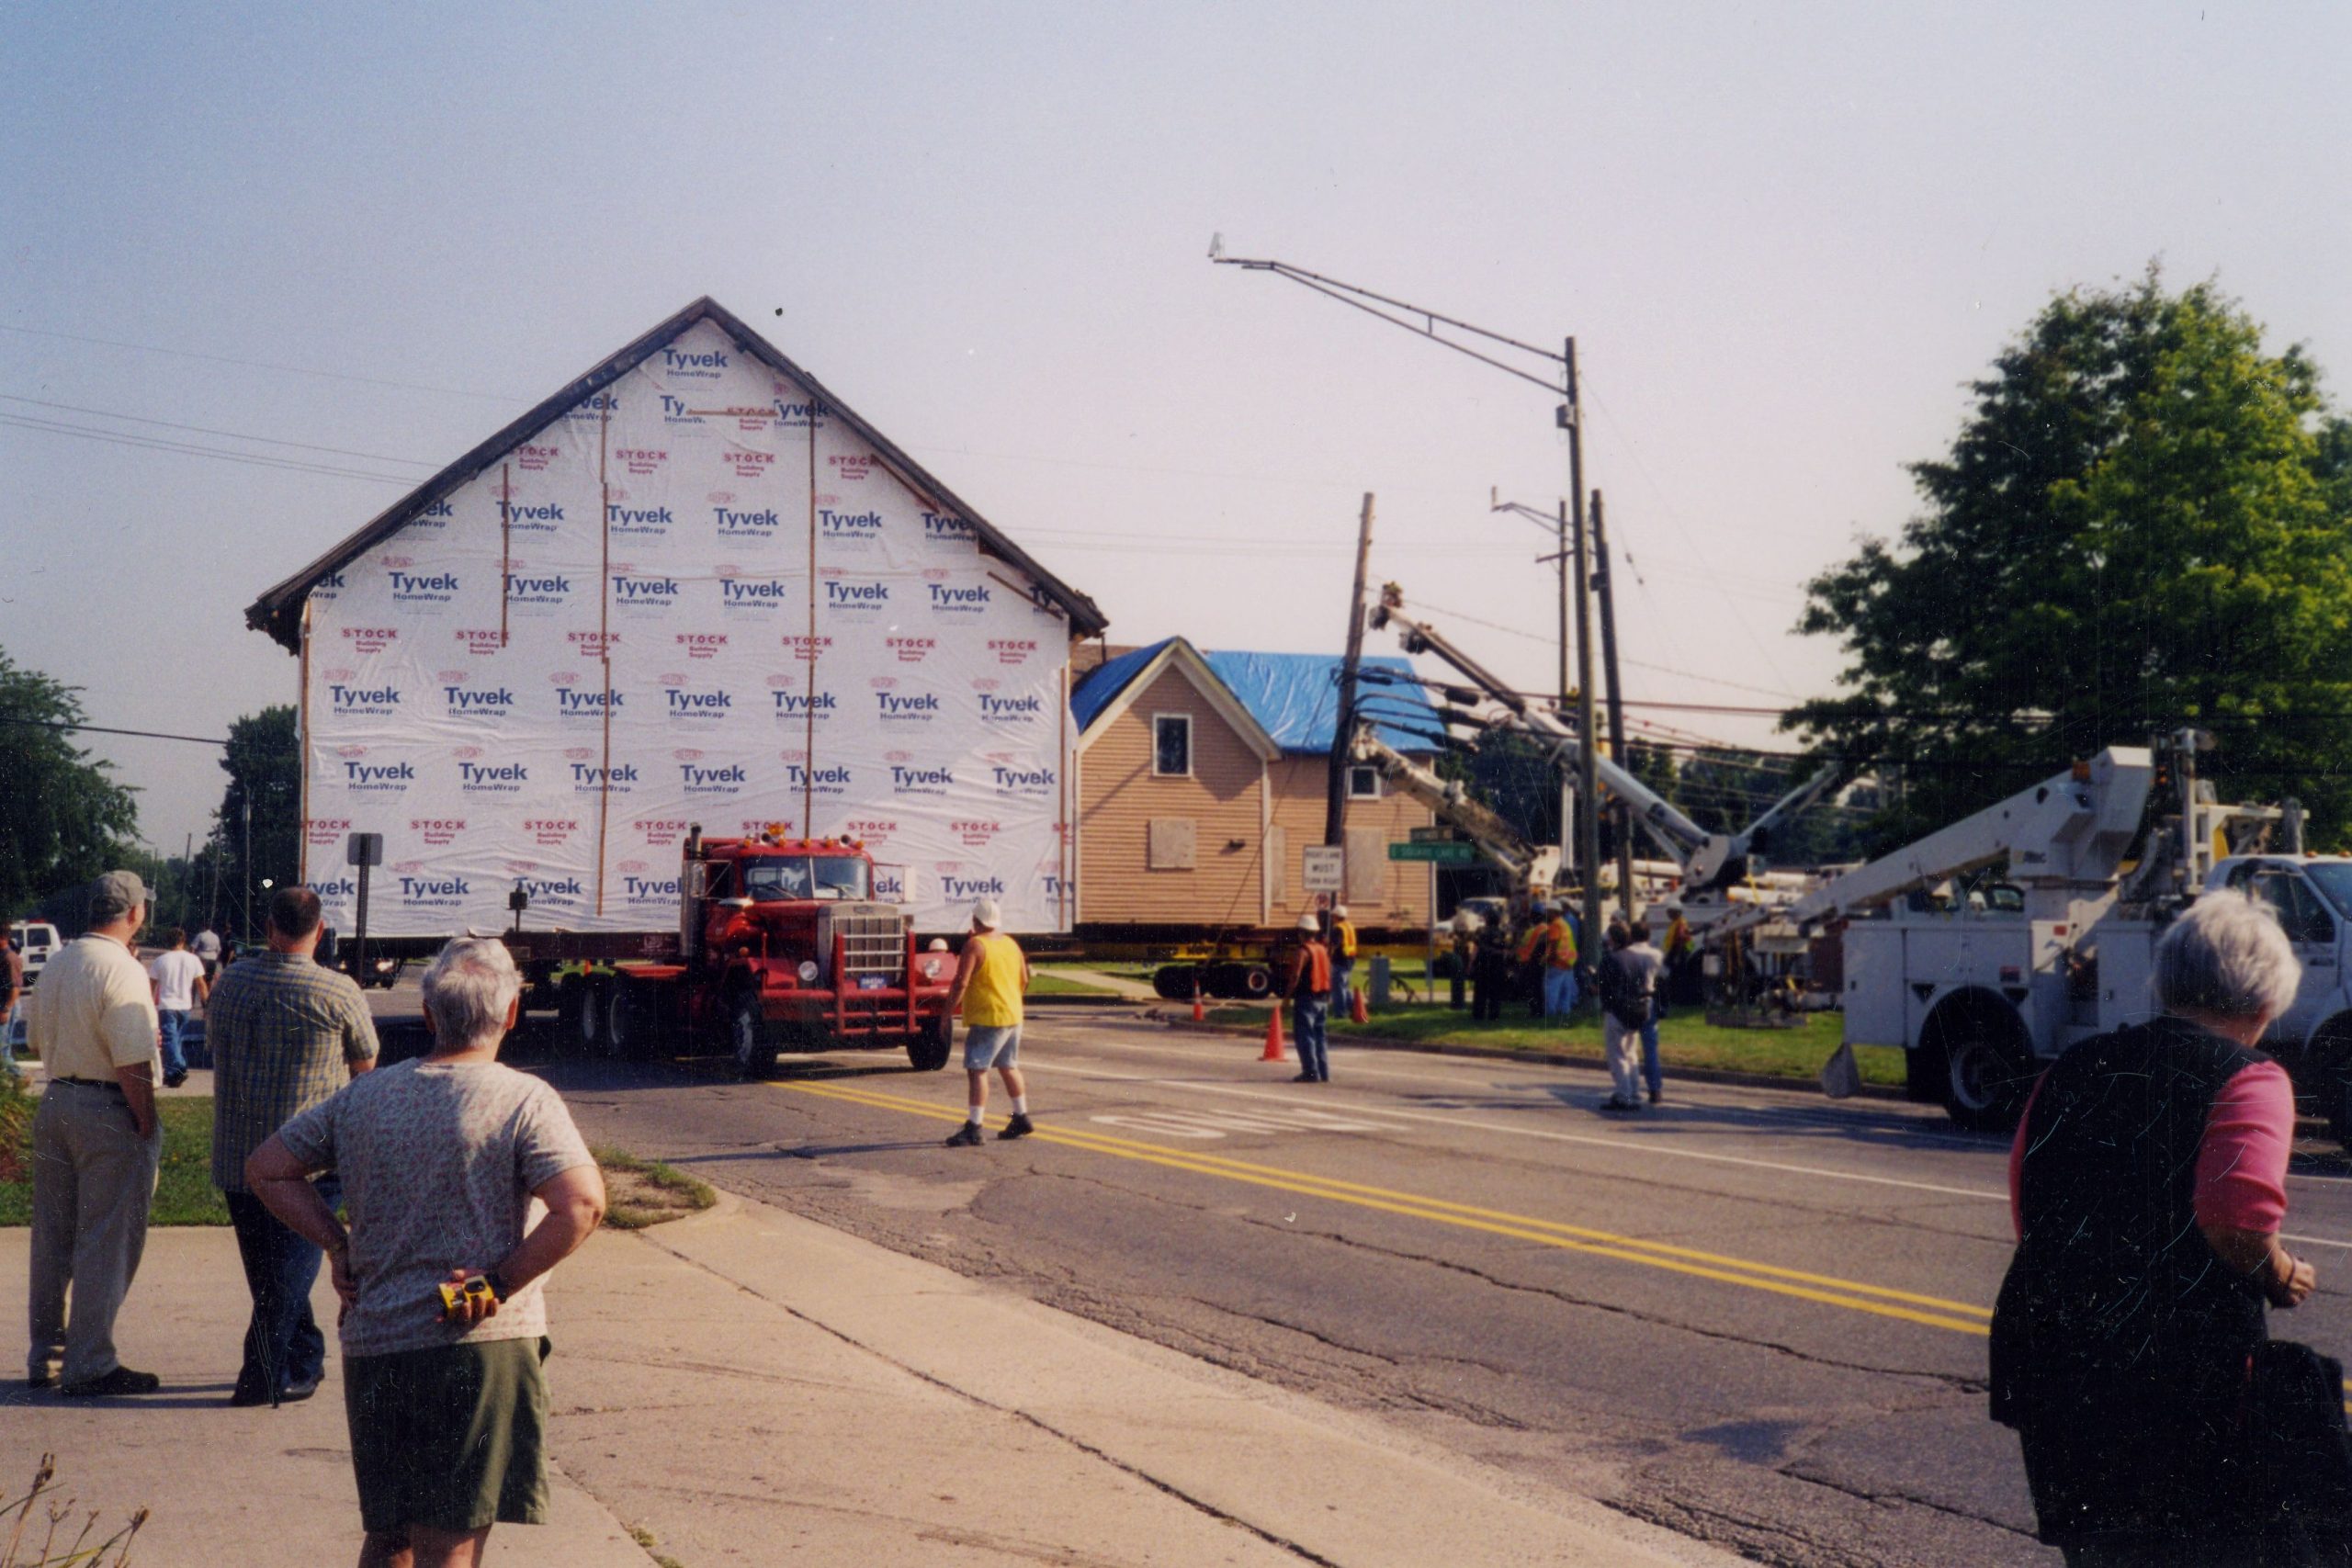 Troy 1st UMC moving in late 1990s